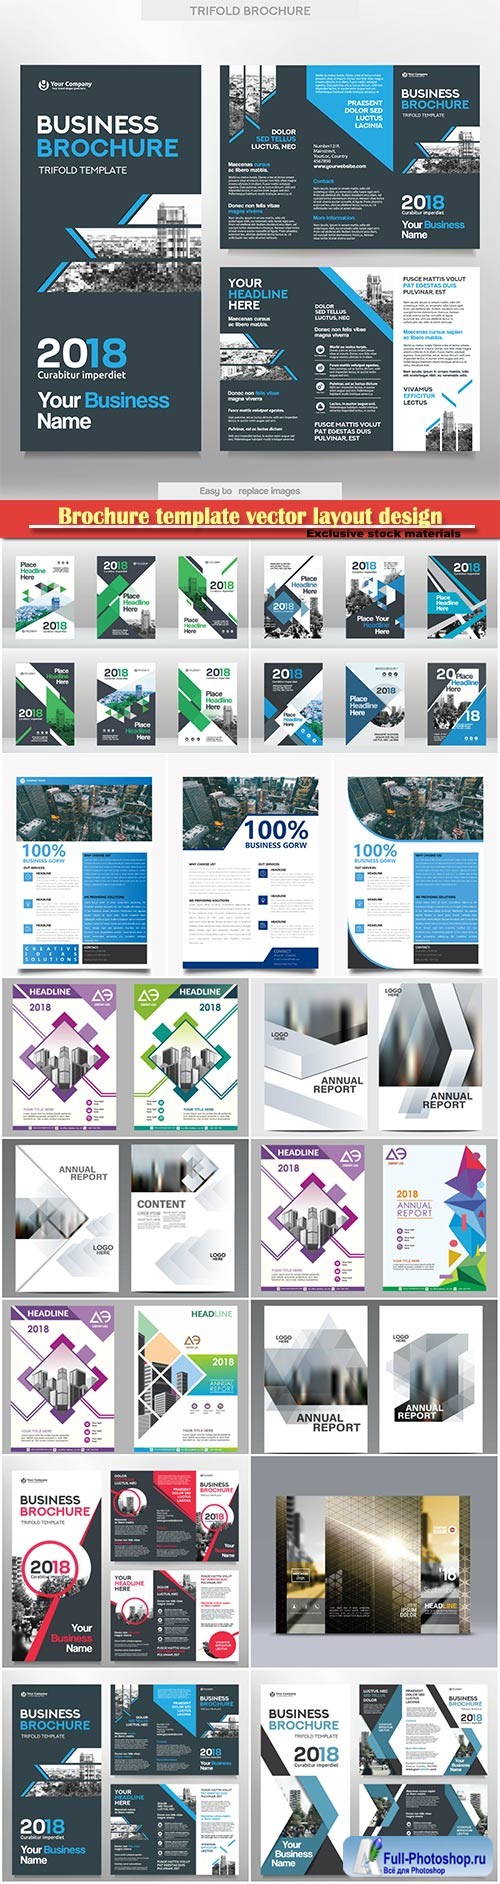 Brochure template vector layout design, corporate business annual report, magazine, flyer mockup # 125